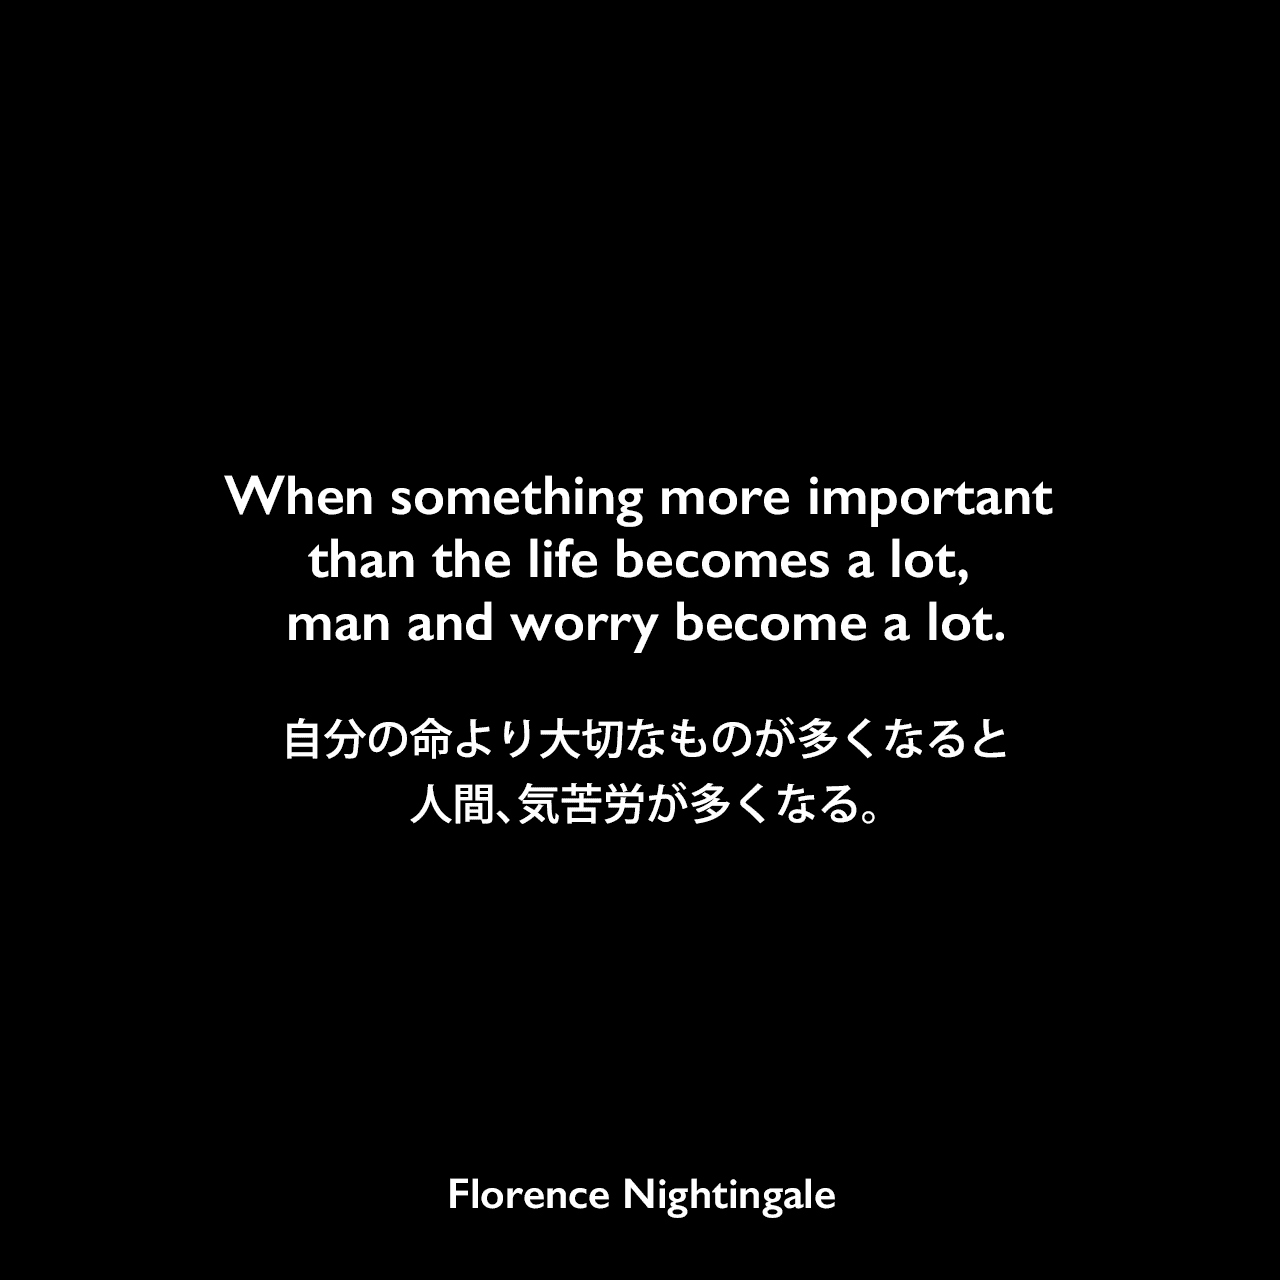 When something more important than the life becomes a lot, man and worry become a lot.自分の命より大切なものが多くなると、人間、気苦労が多くなる。Florence Nightingale